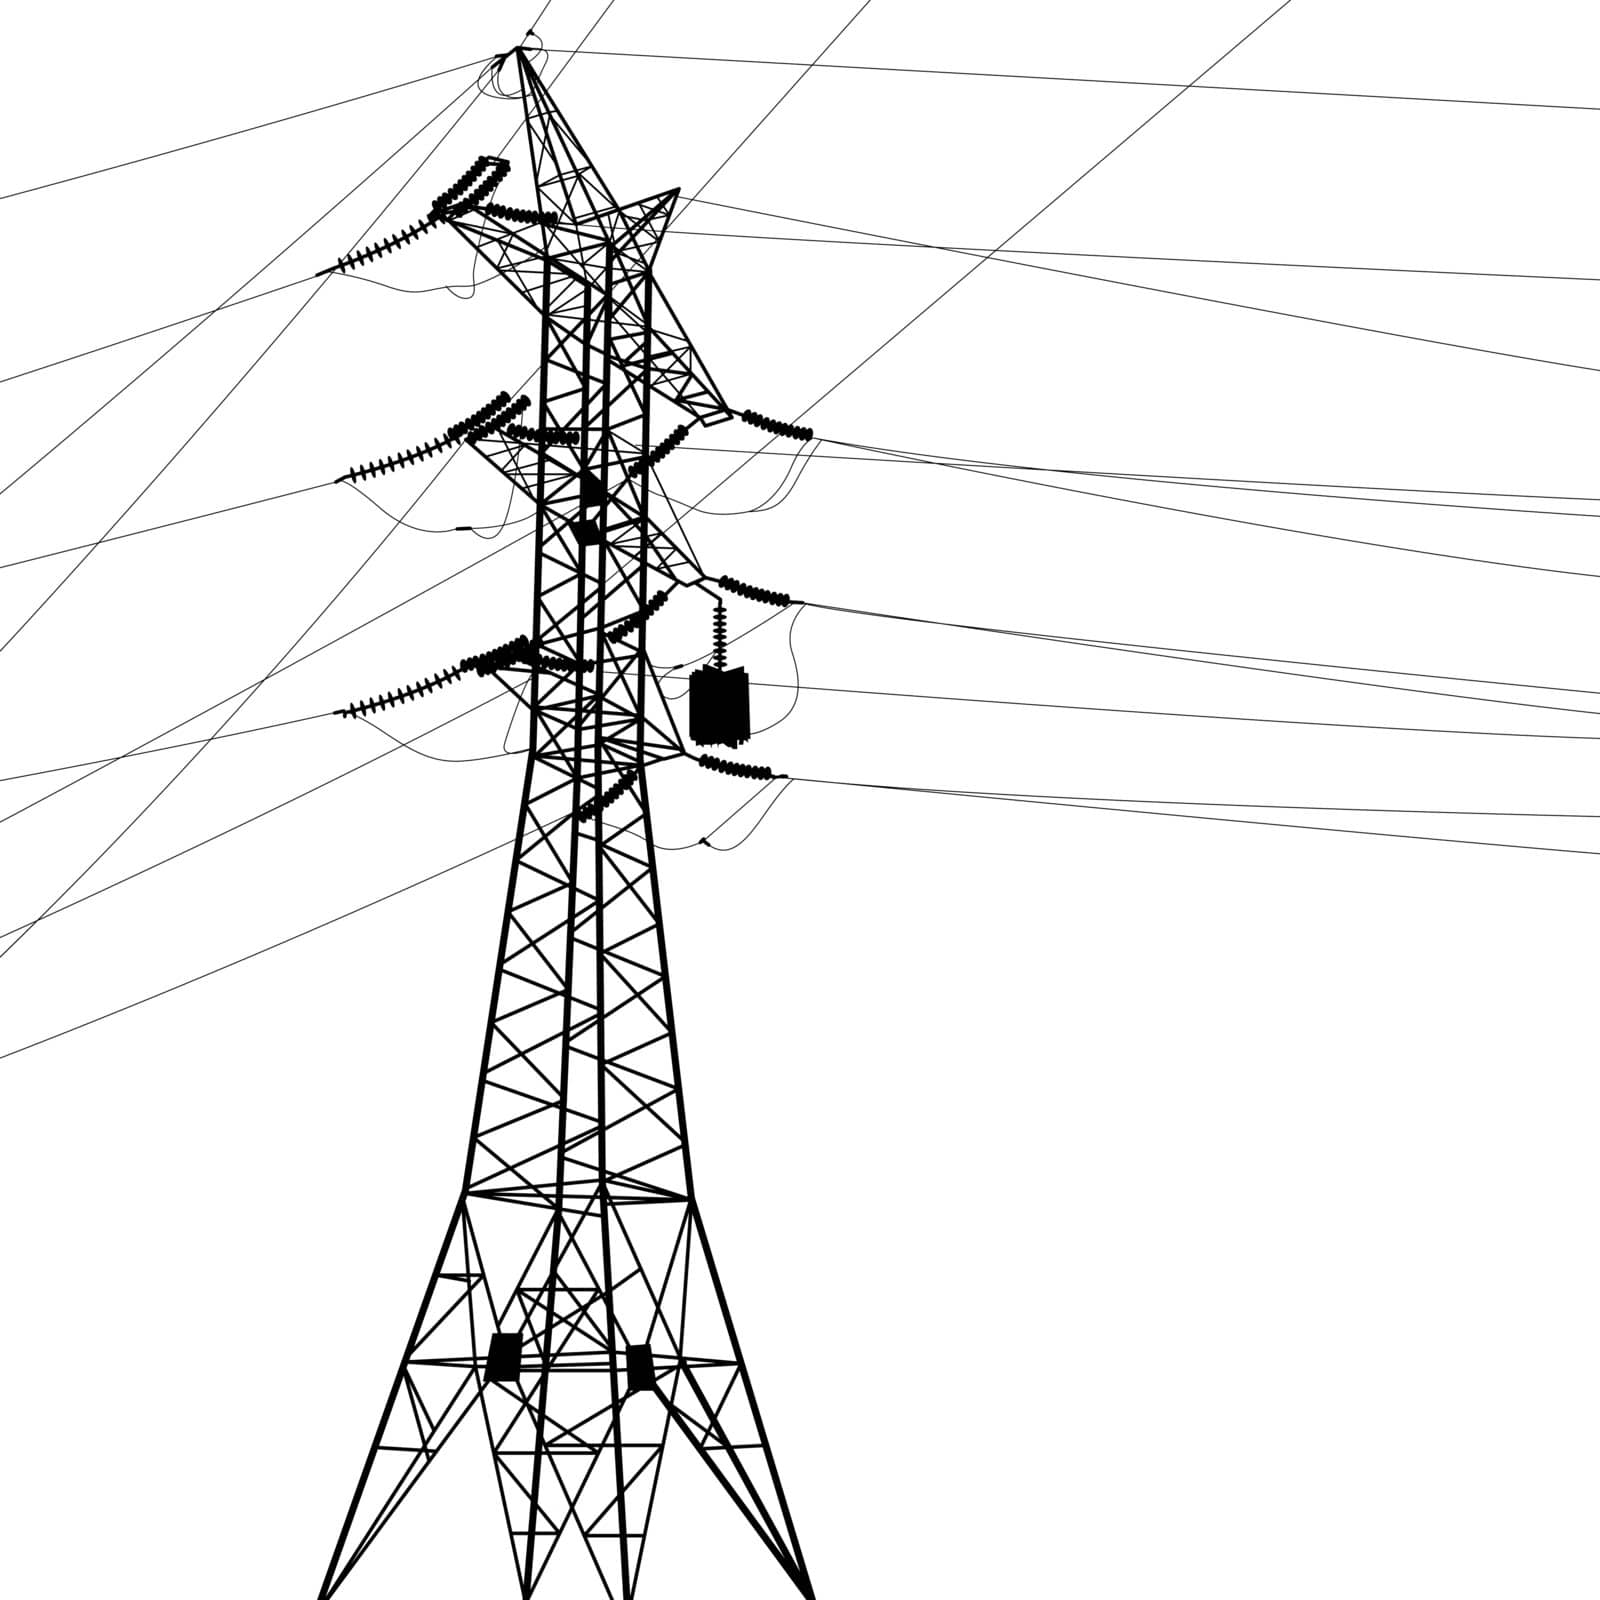 Silhouette of high voltage power lines. by aarrows